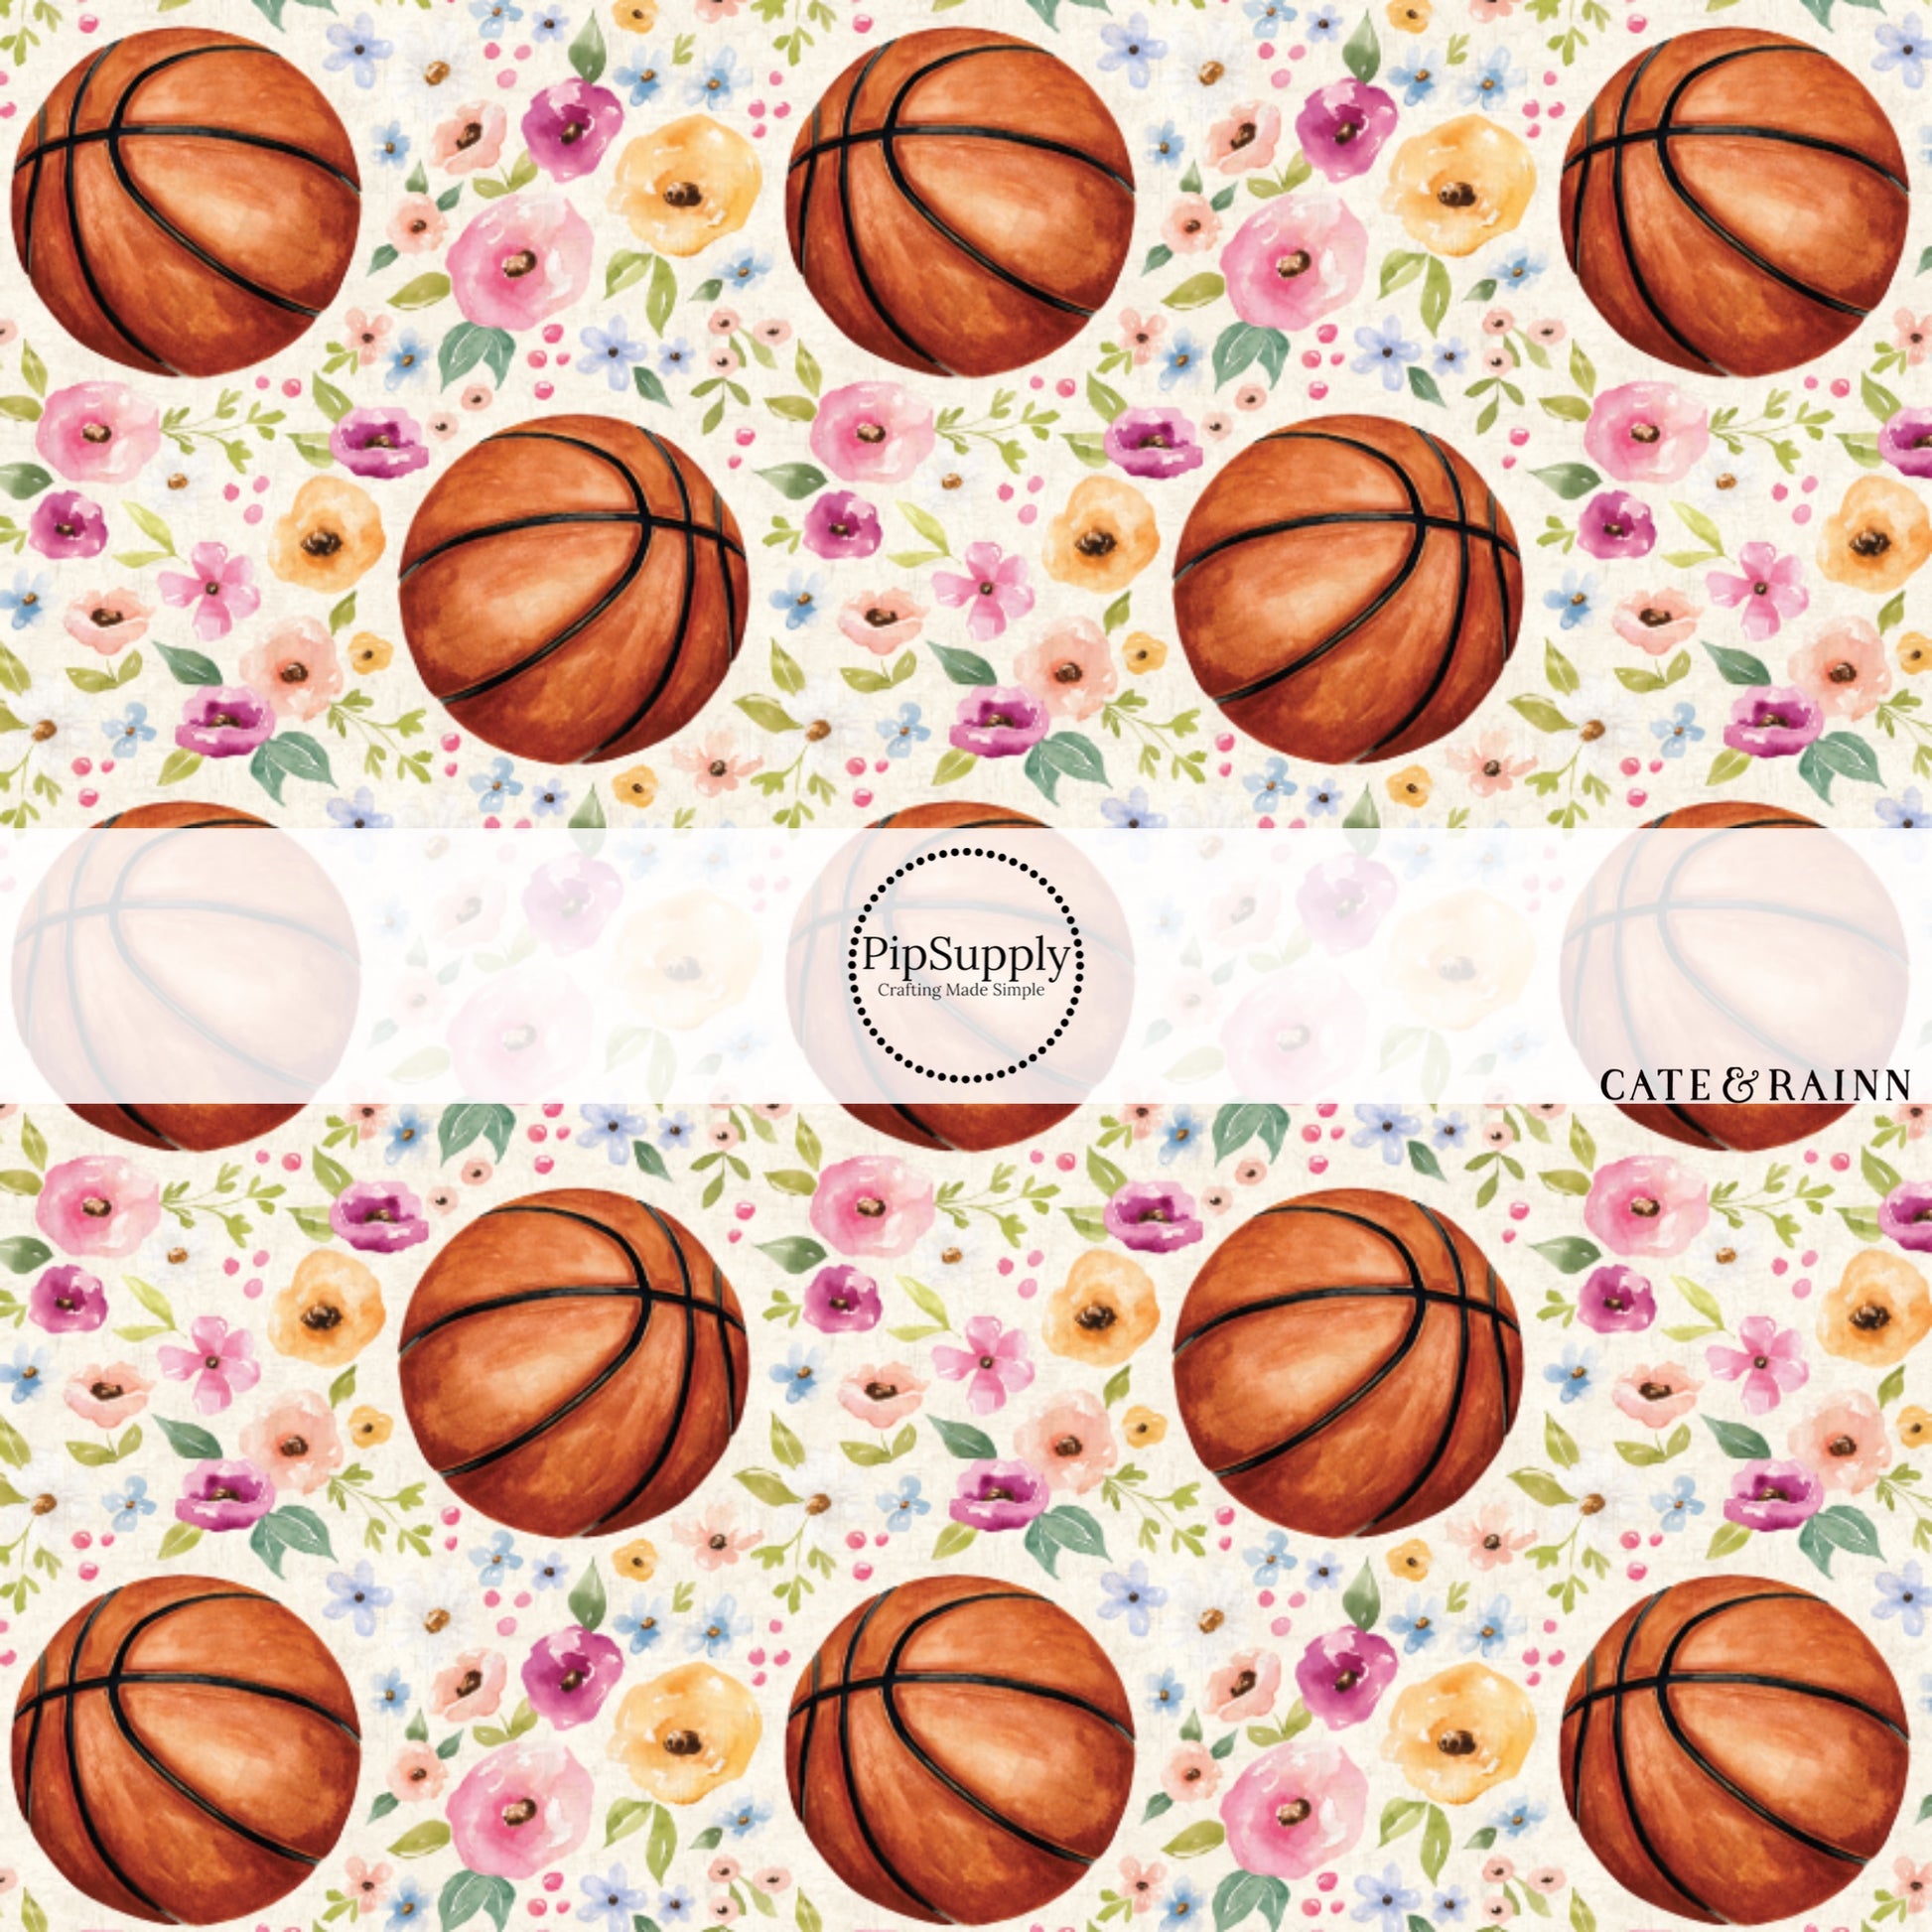 Pastel Florals and Basketballs on Cream Fabric by the Yard.